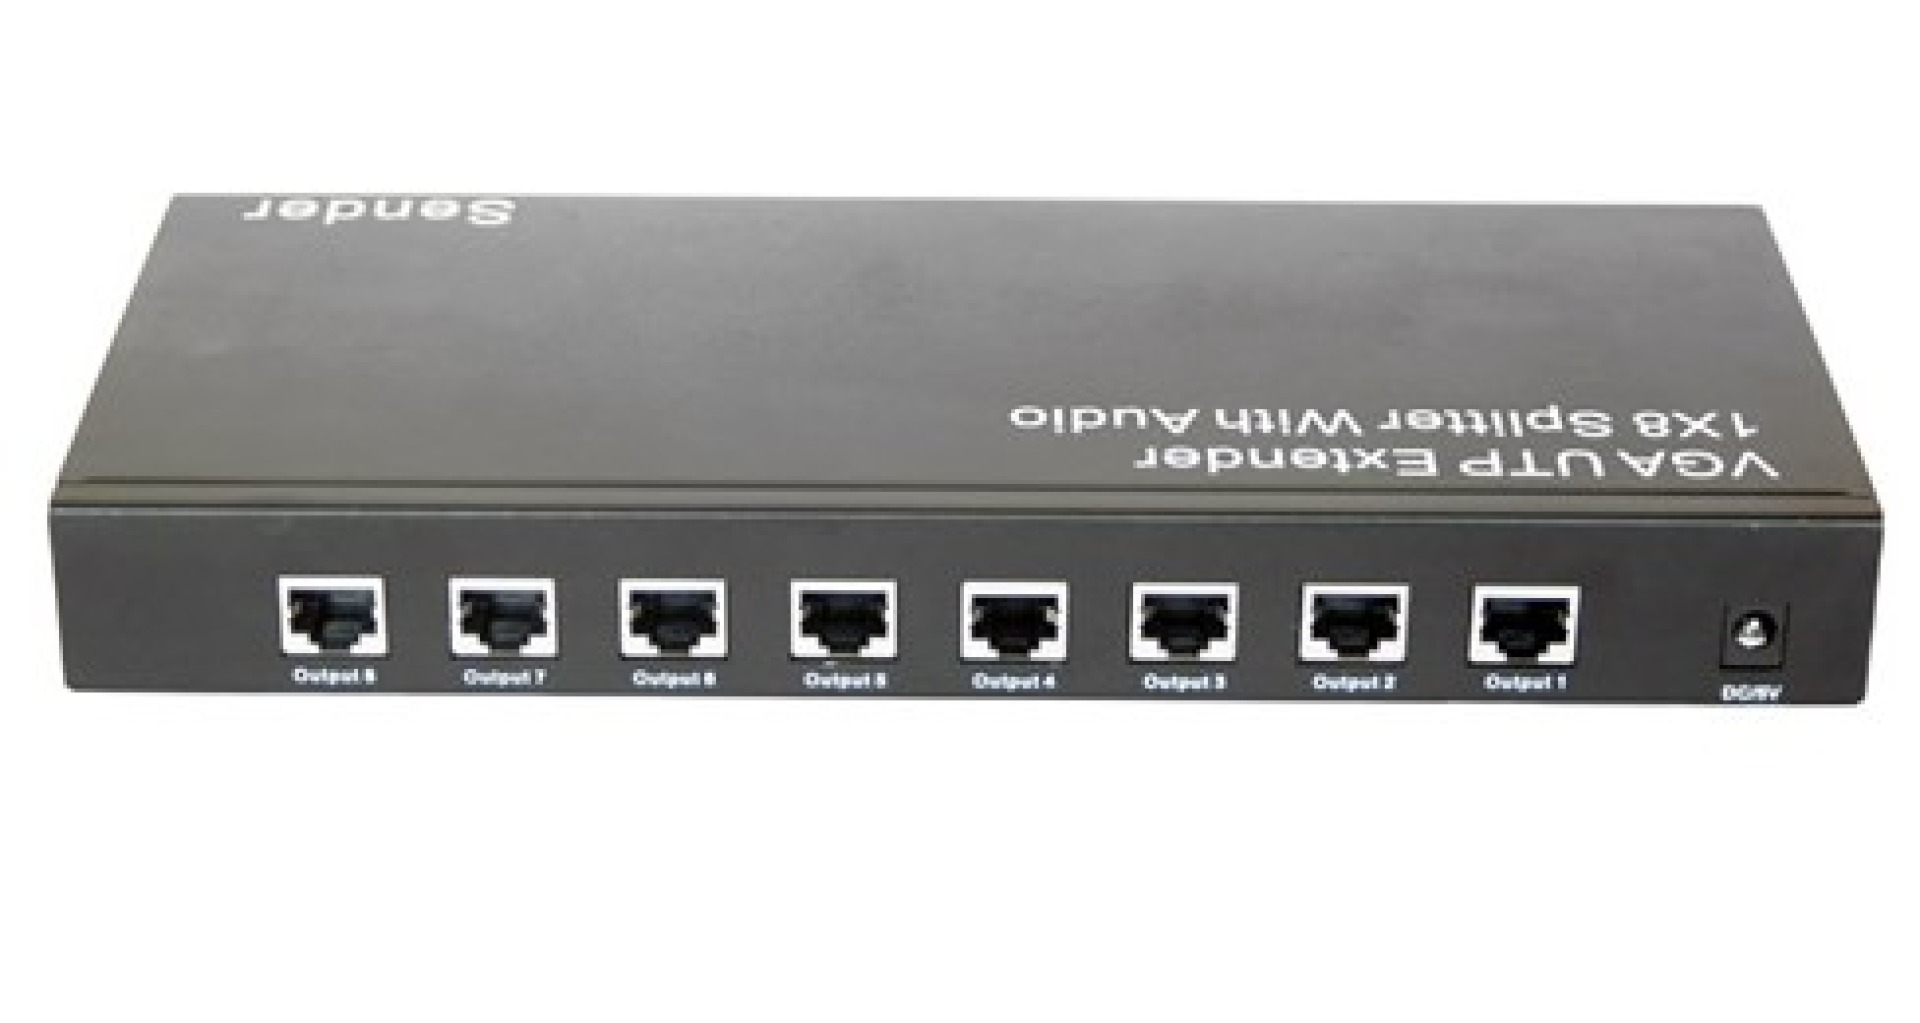 VGA Extender/Splitter with Video/Audio 8-Ports over Cat.5e/6 cable, 300m